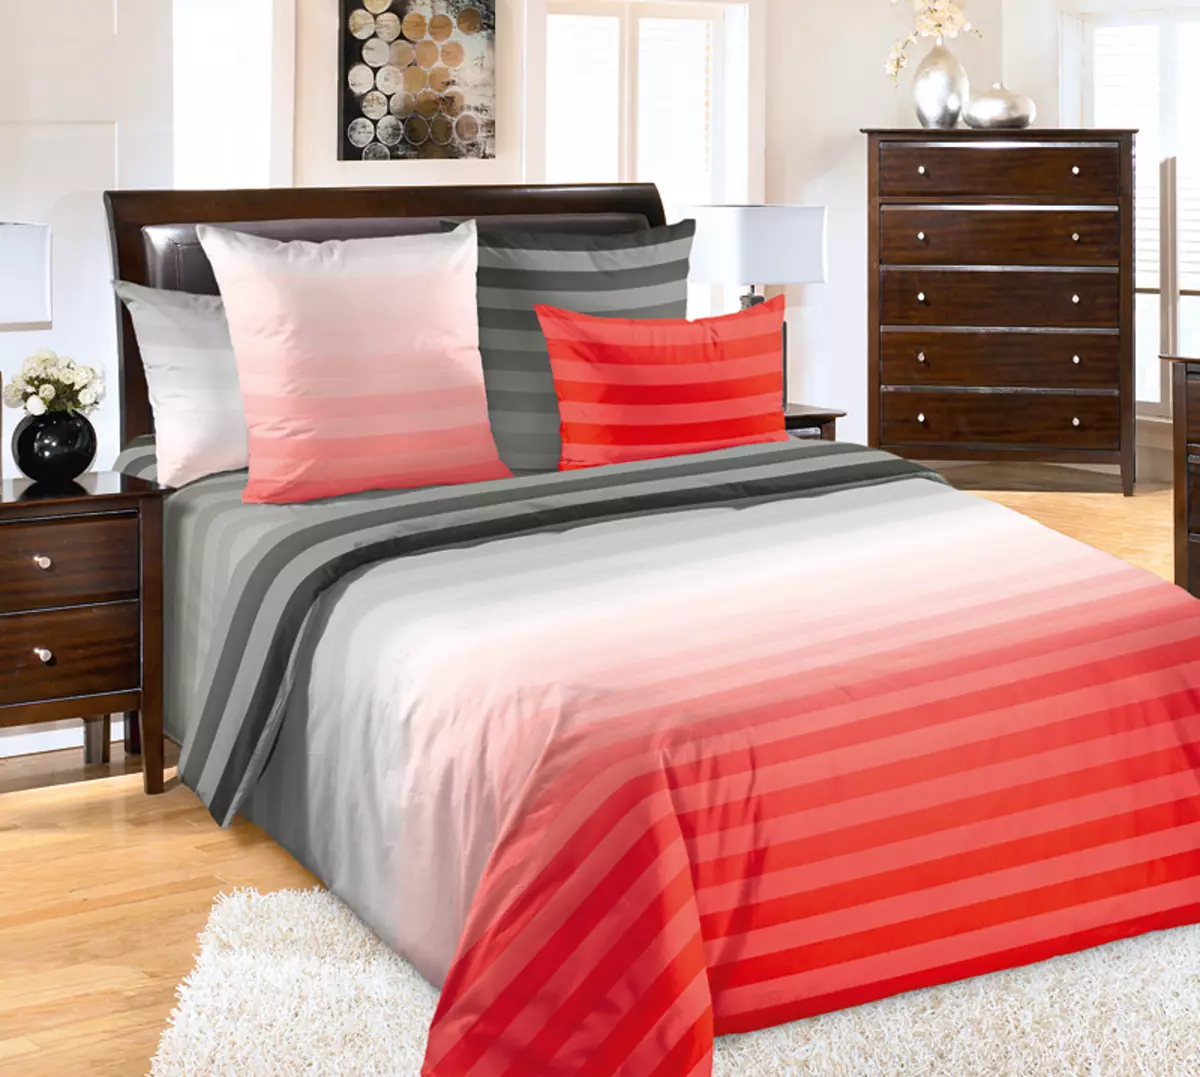 Bed linen fabric: What material is better to buy? Types and rating. How to choose high-quality bed? What are they sewed from? 24761_16